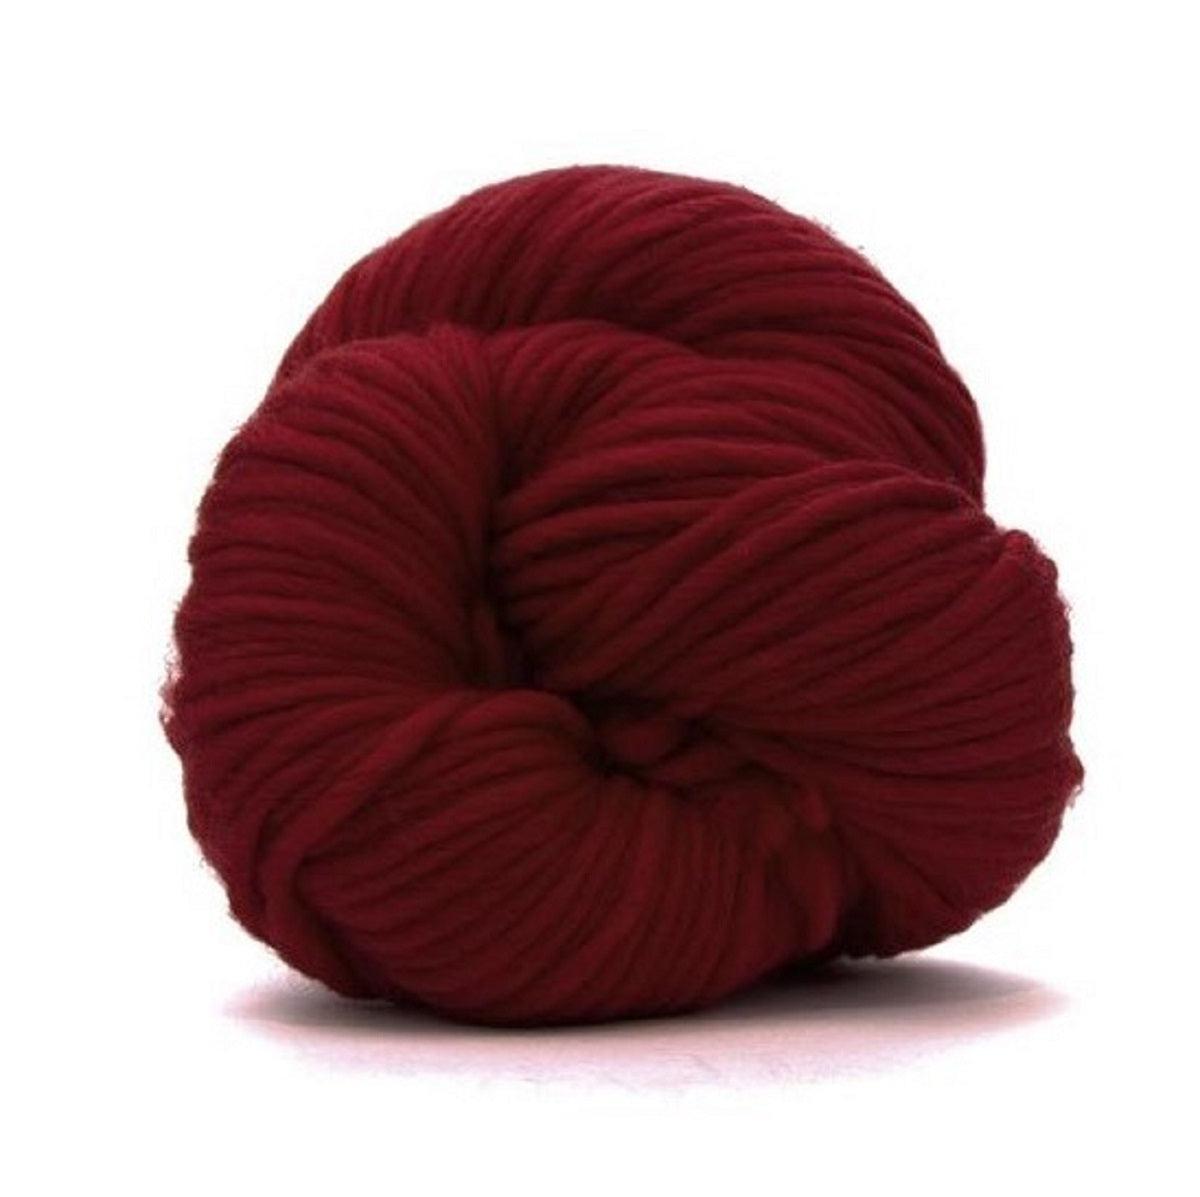 Premium Super Bulky (Chunky) Weight Solid Color Merino Yarn